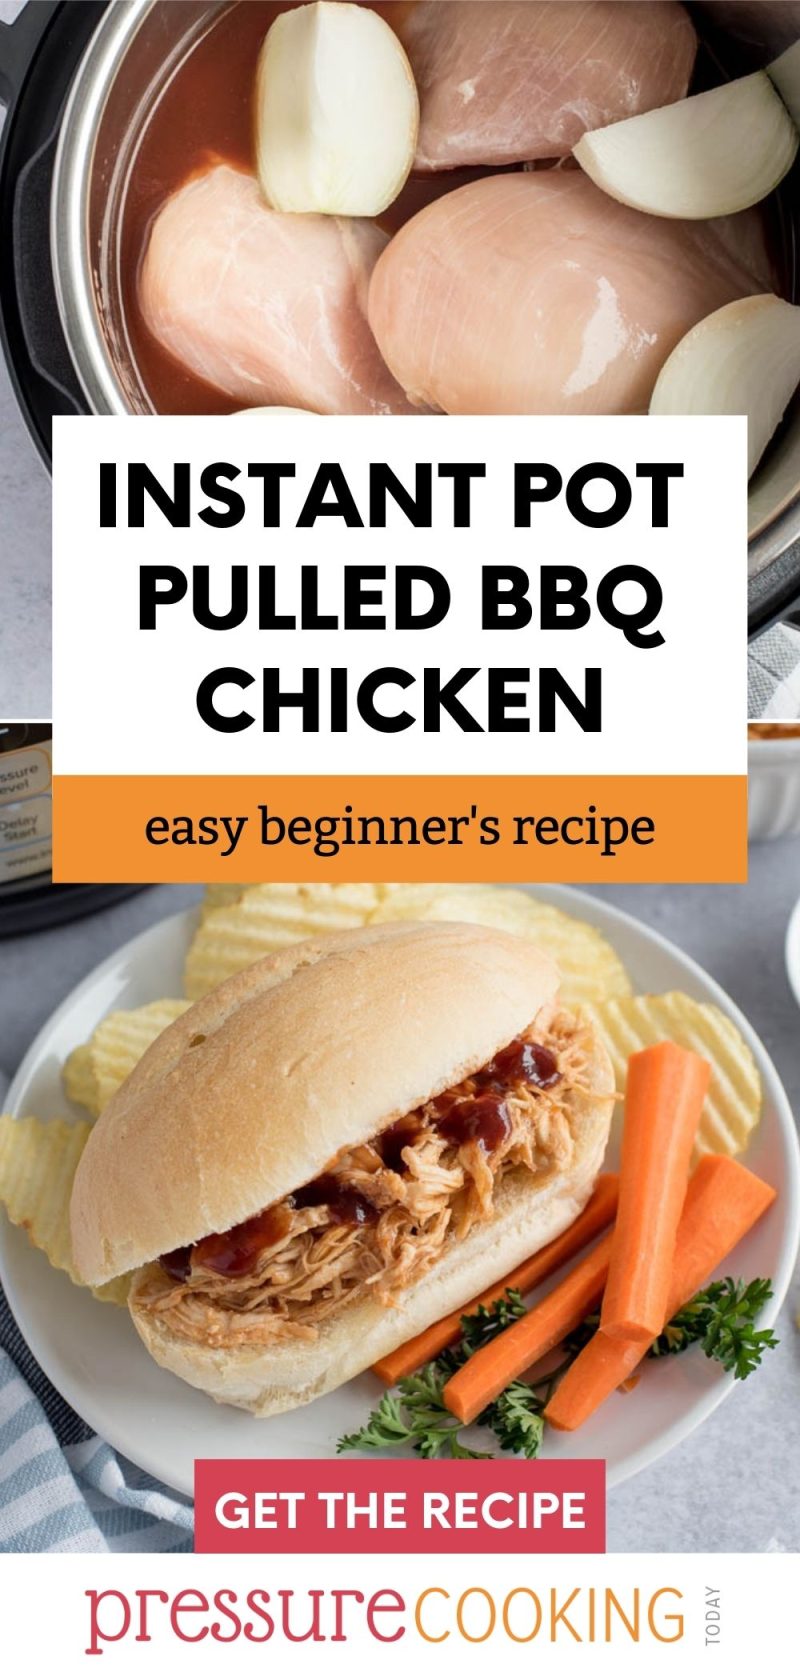 pinterest button that reads "Instant Pot Pulled BBQ Chicken: Easy Beginner's Recipe" overlaid on two photos. The first of chicken breast and onions in the cooking pot, and the second of a BBQ chicken sandwich plated with potato chips and carrot sticks.